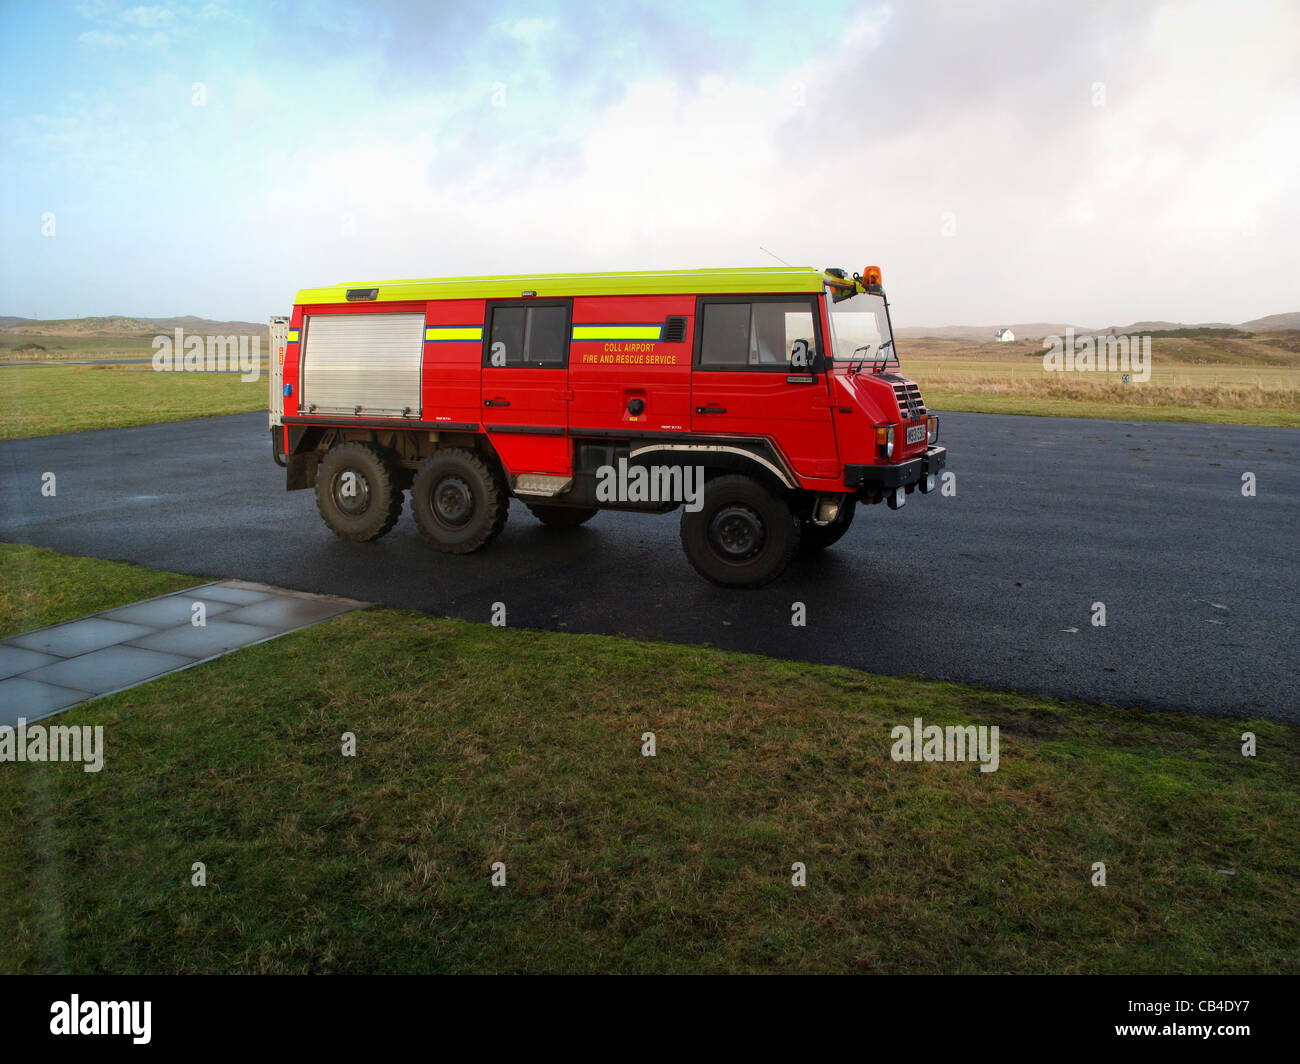 Coll airport fire and recuse service truck Stock Photo